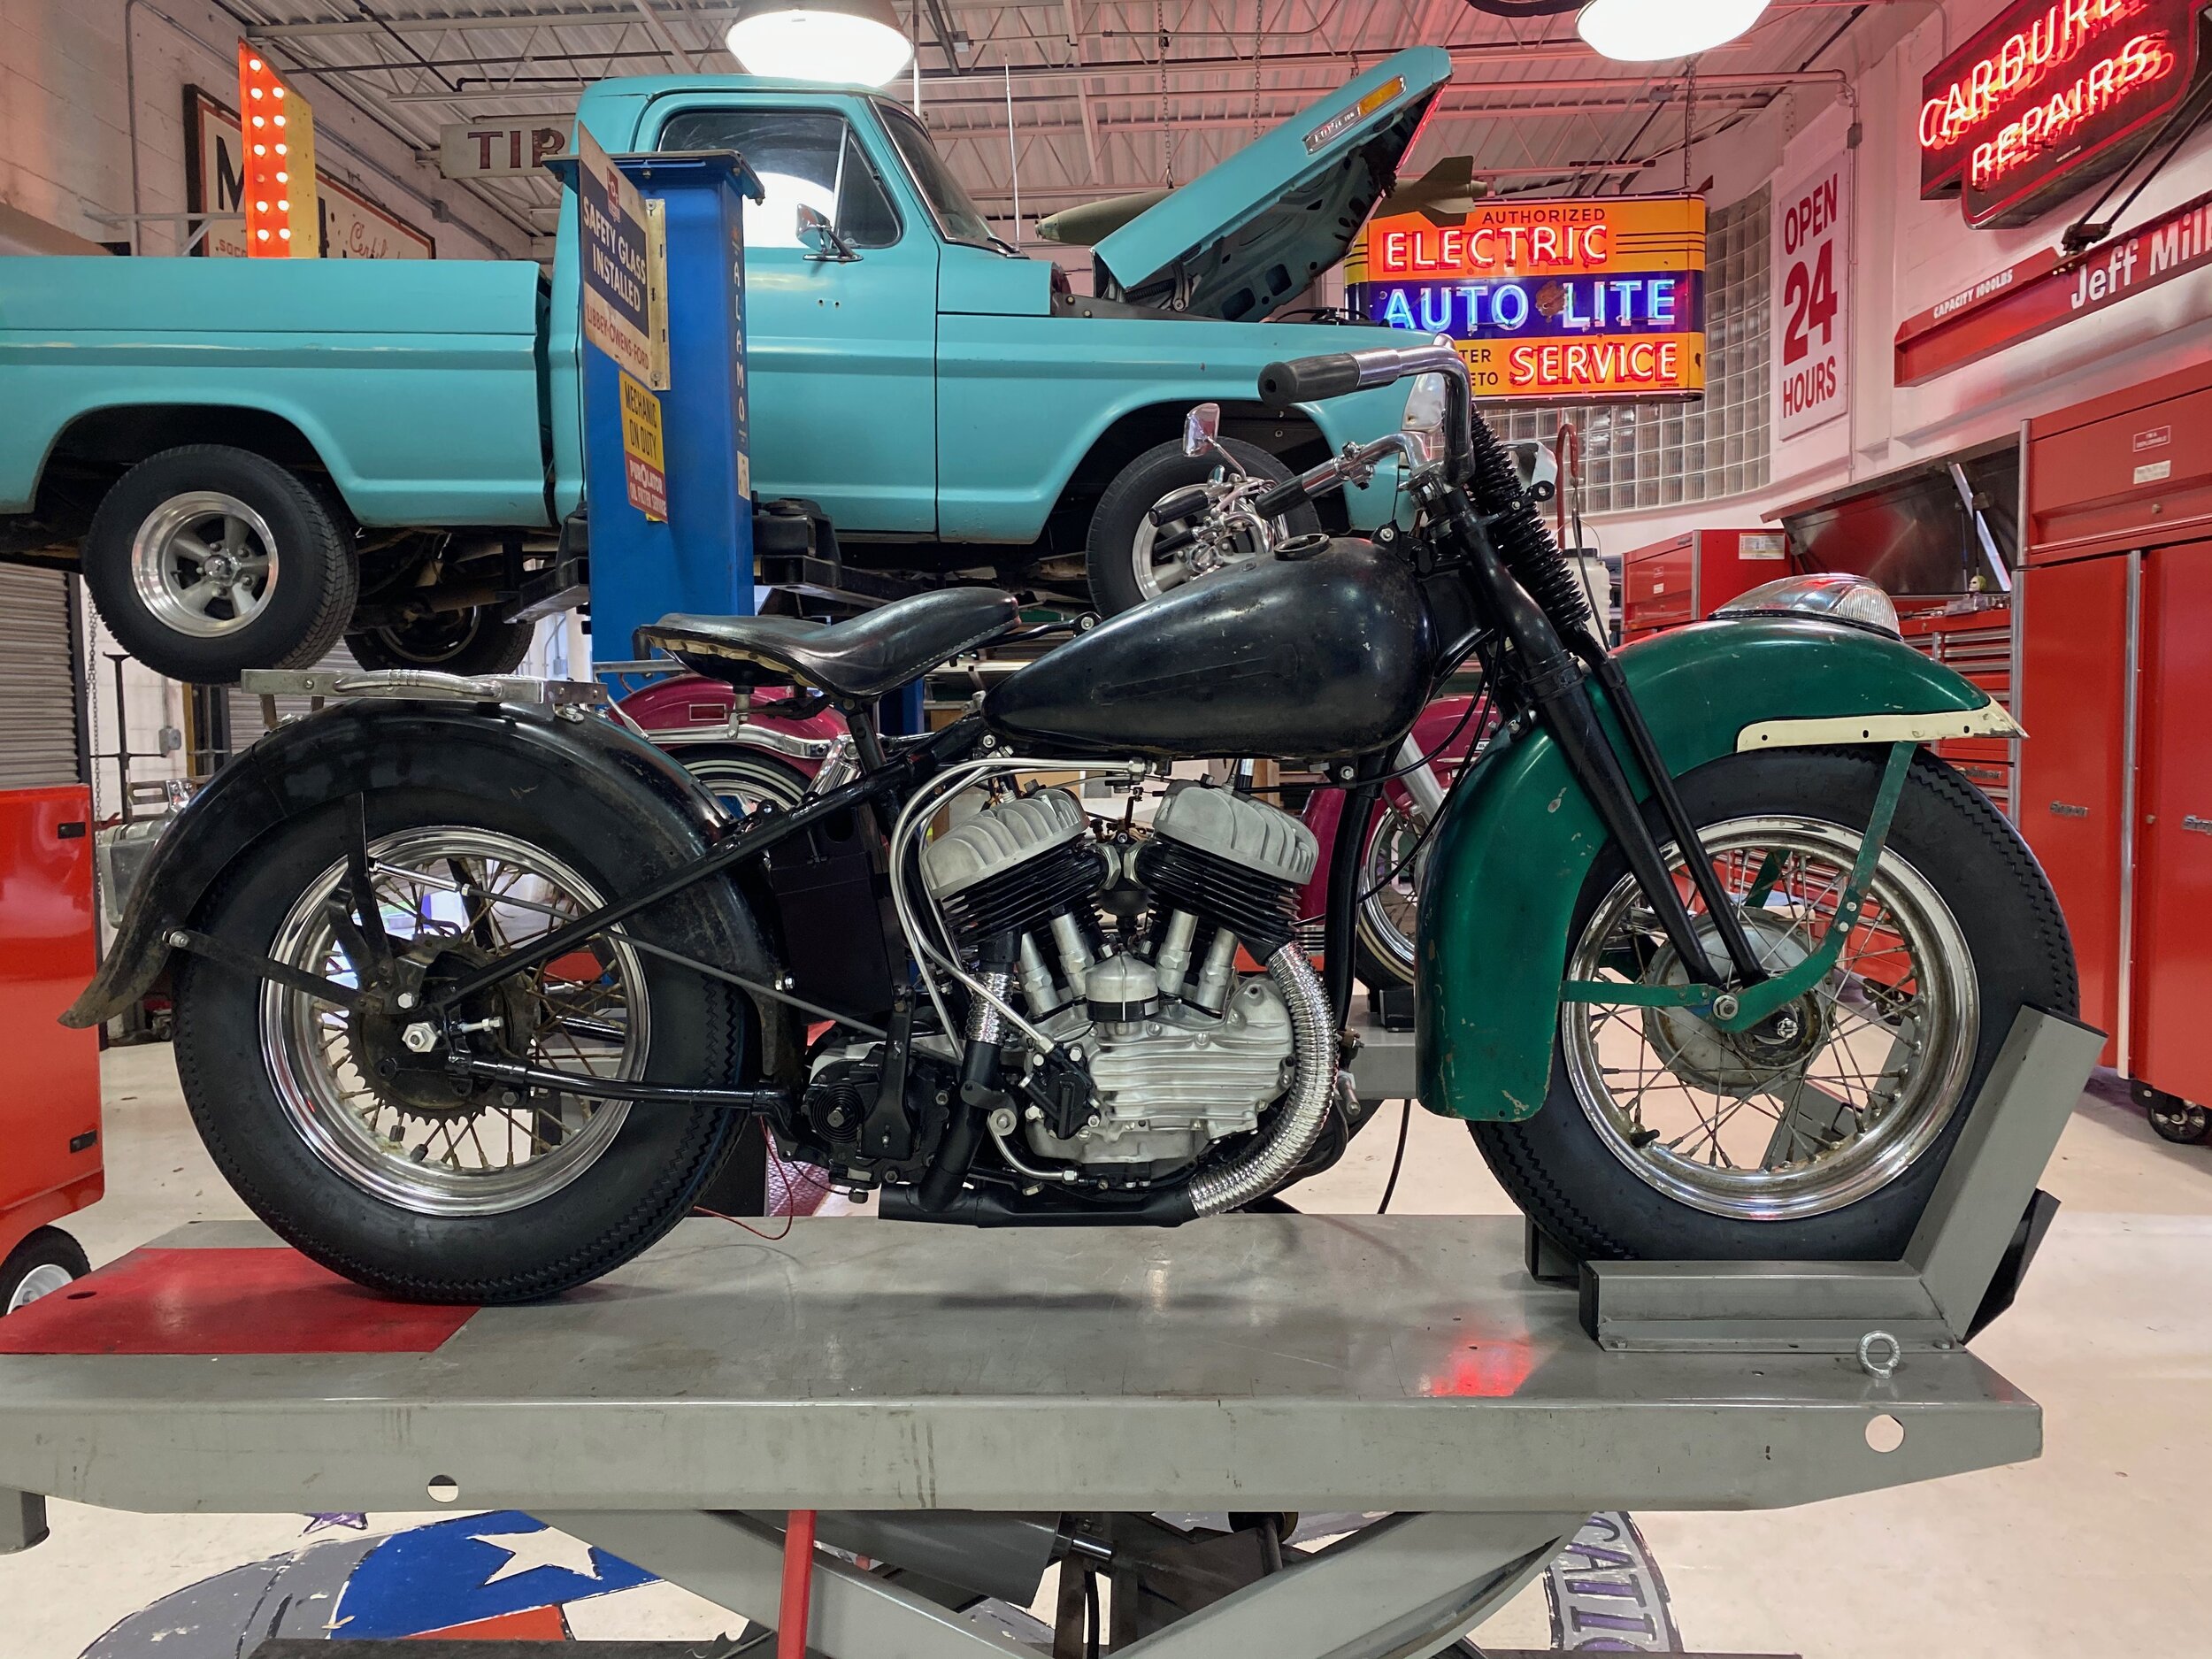 Motorcycle in the Shop